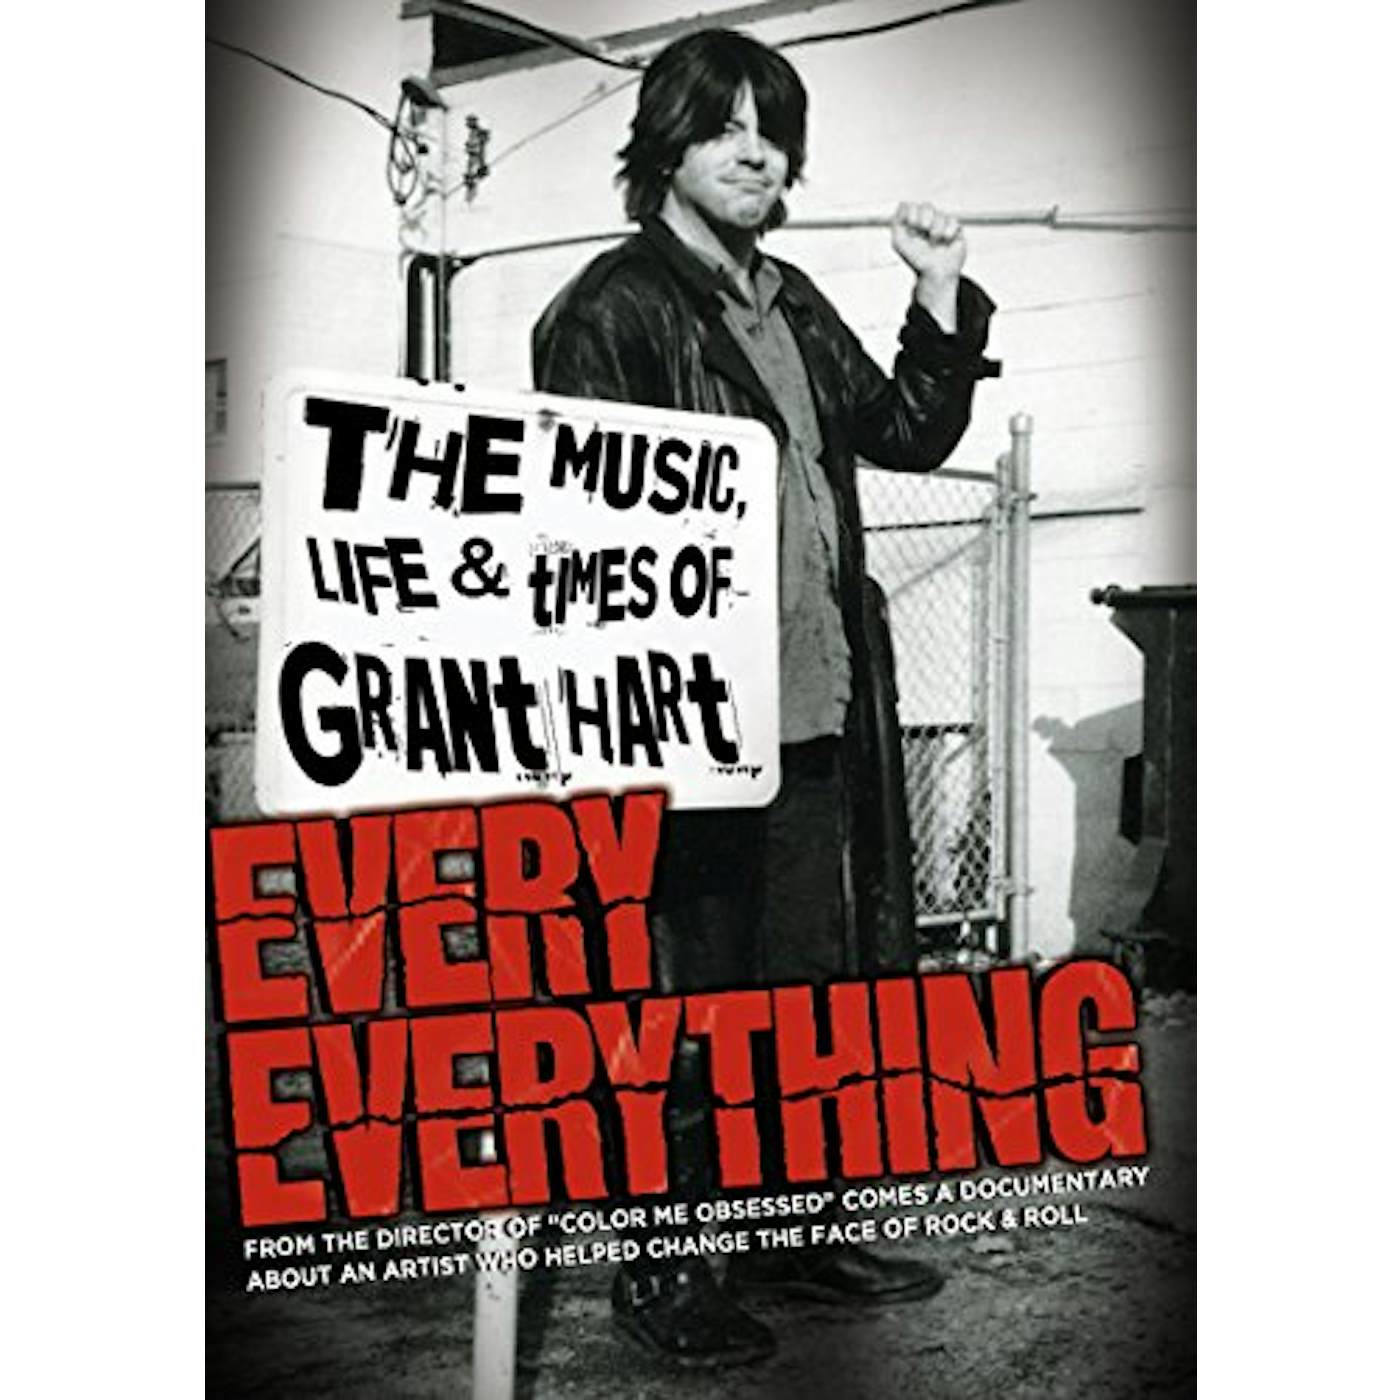 Grant Hart EVERY EVERYTHING: MUSIC LIFE & TIMES OF DVD